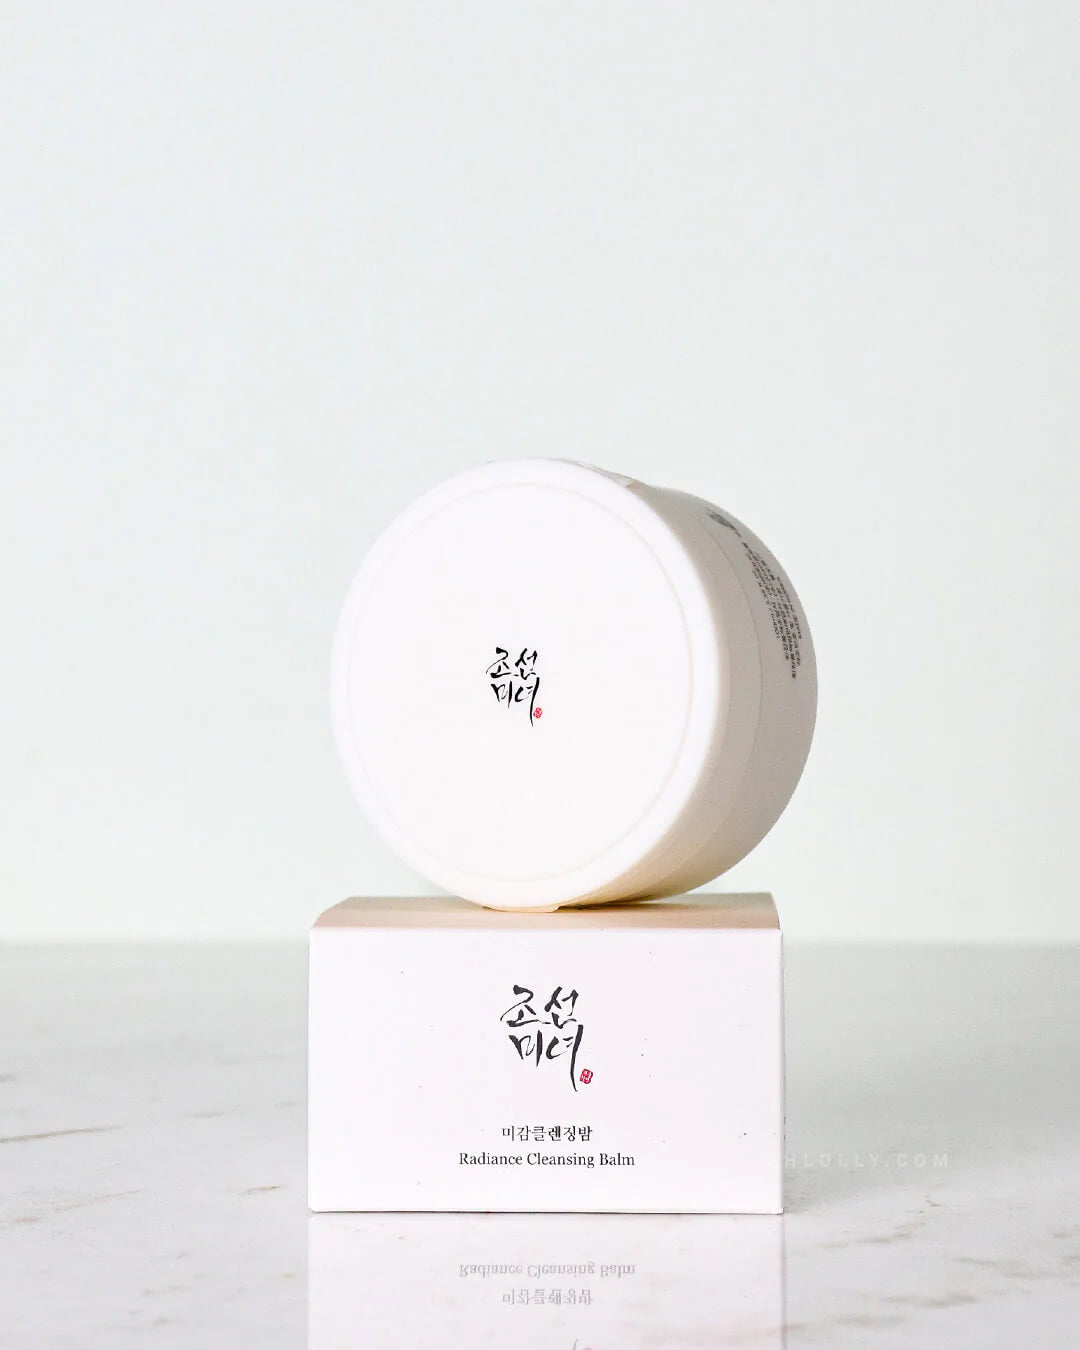 Beauty Of Joseon Radiance Cleansing Balm (100ML)